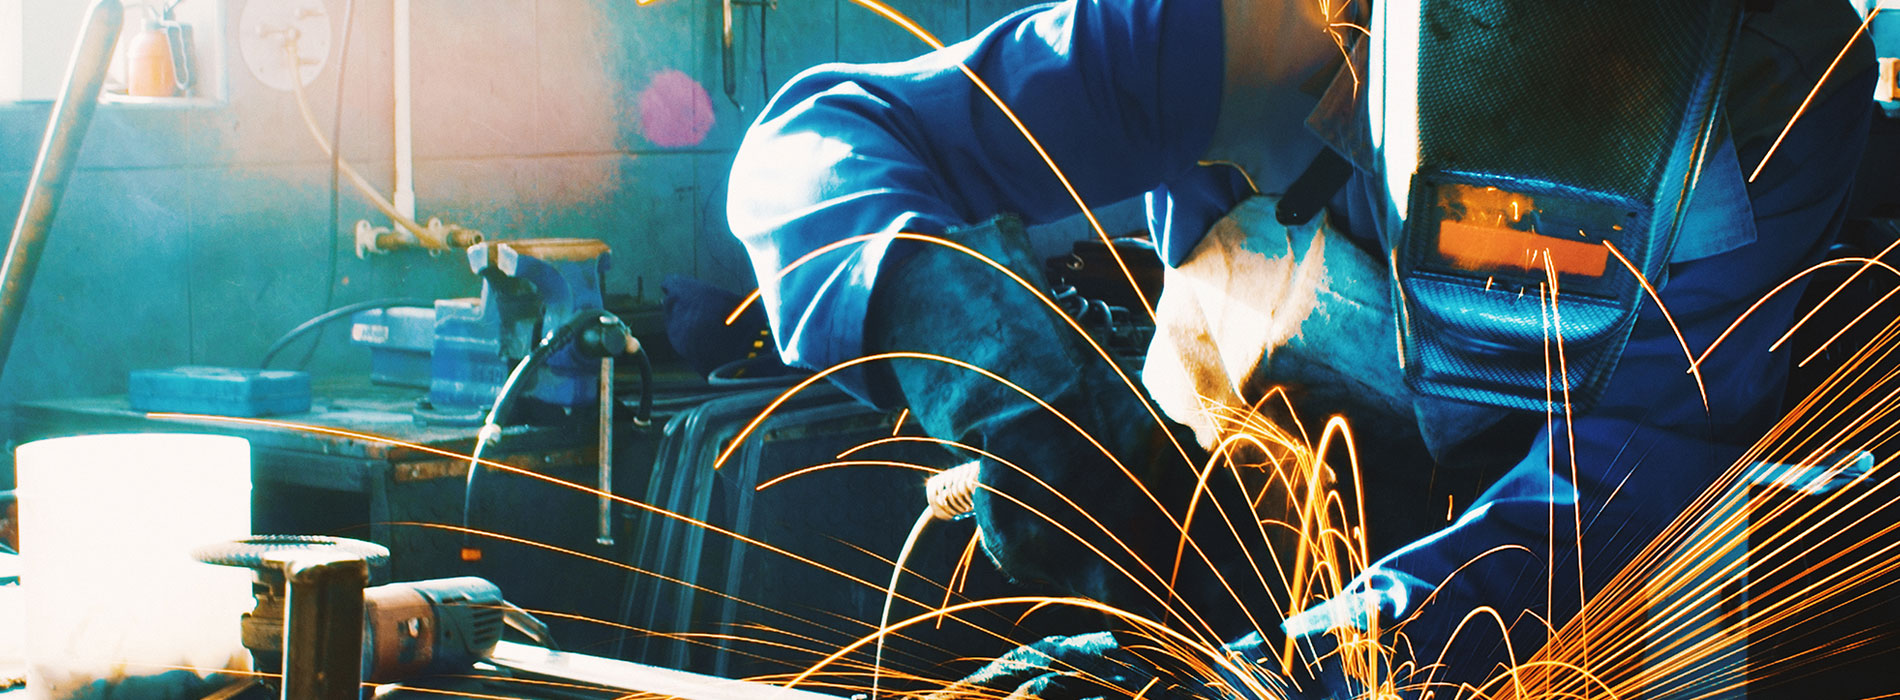 Worker in suit with sparks flying